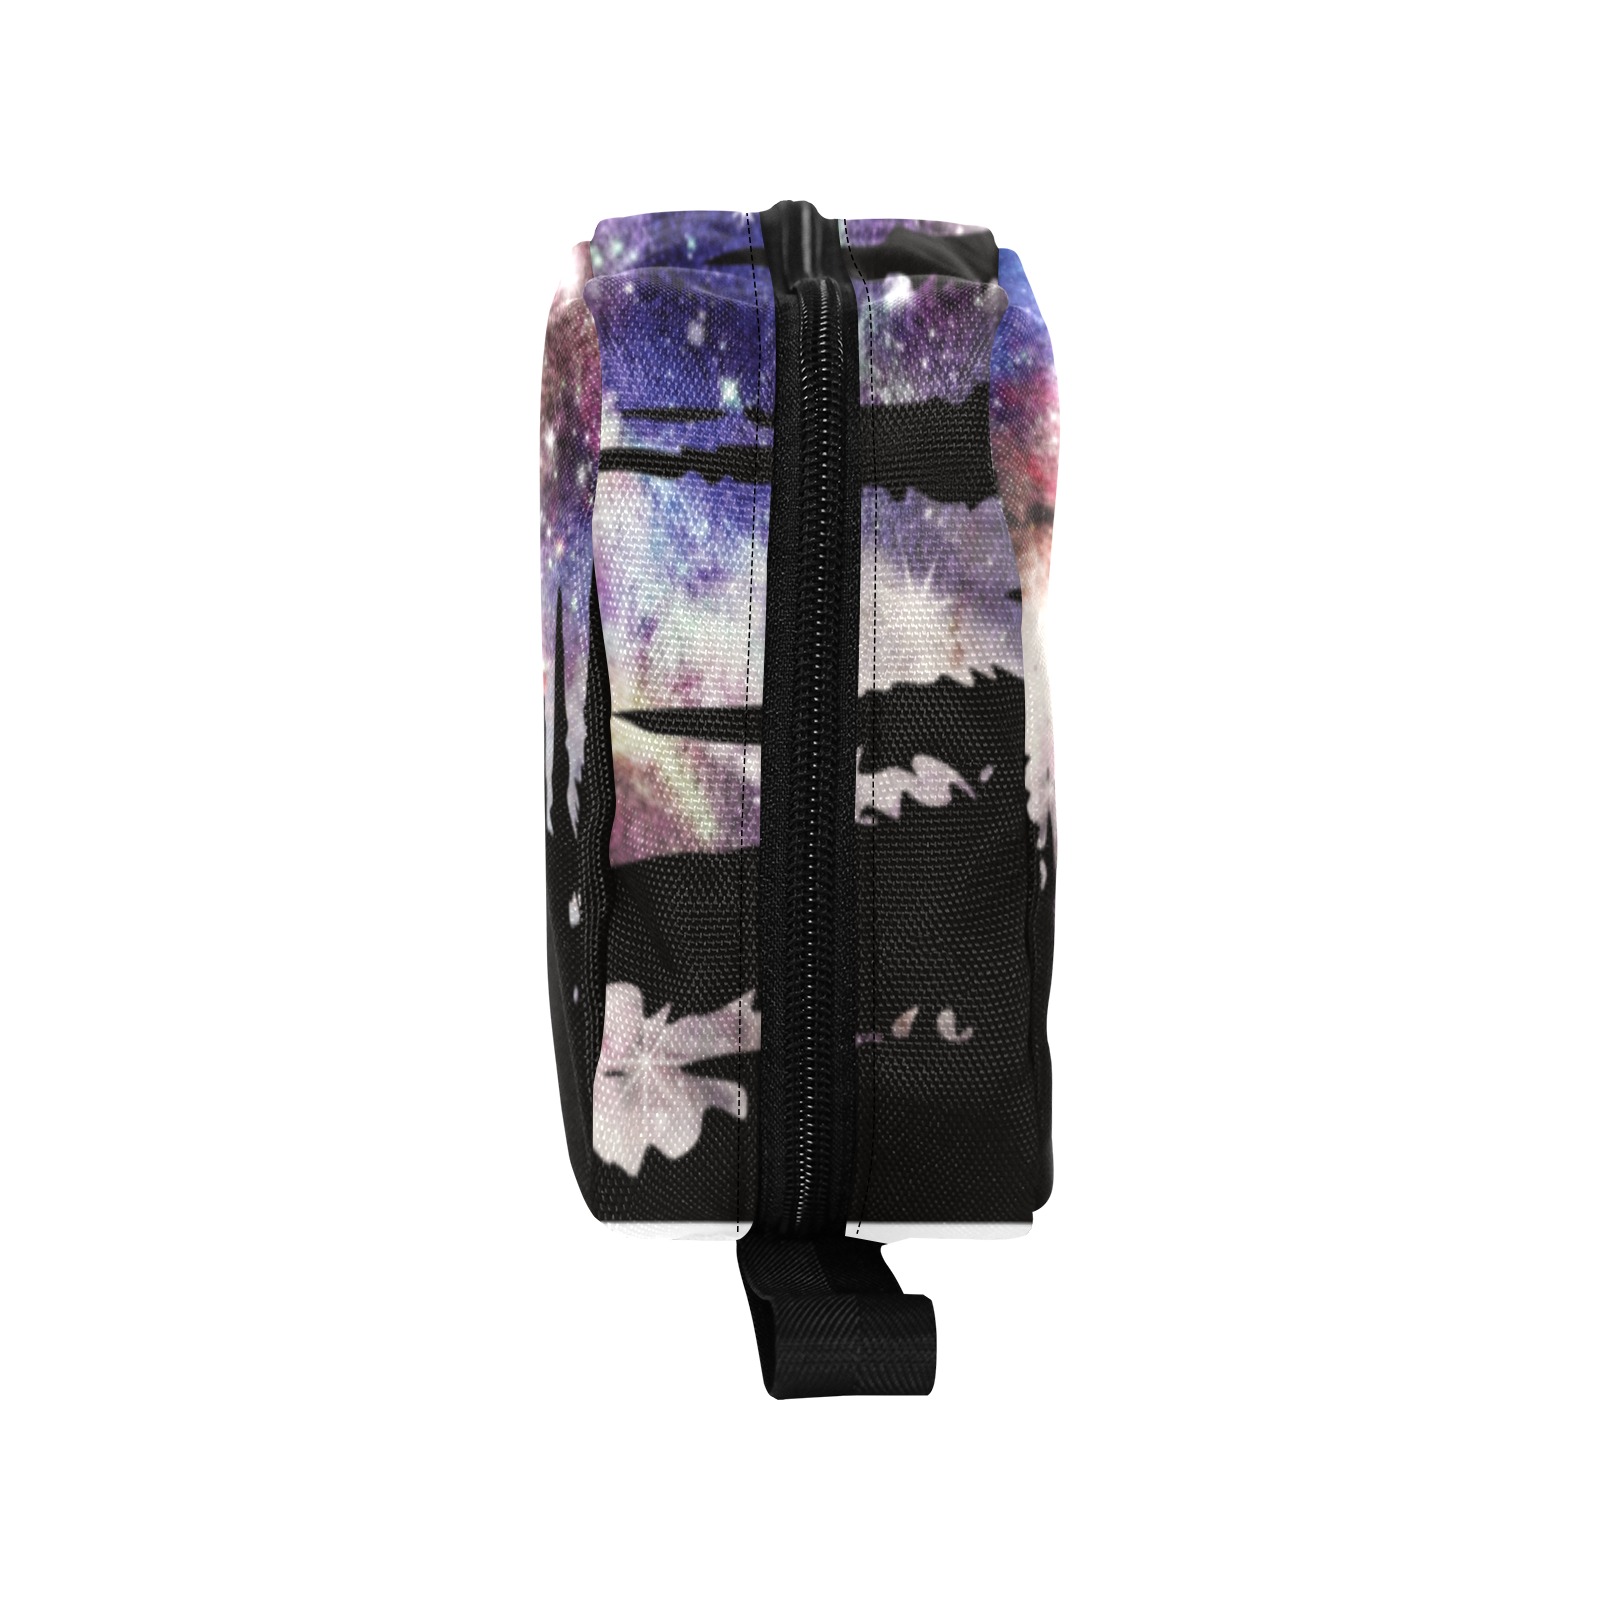 starry sky Toiletry Bag with Hanging Hook (Model 1728)